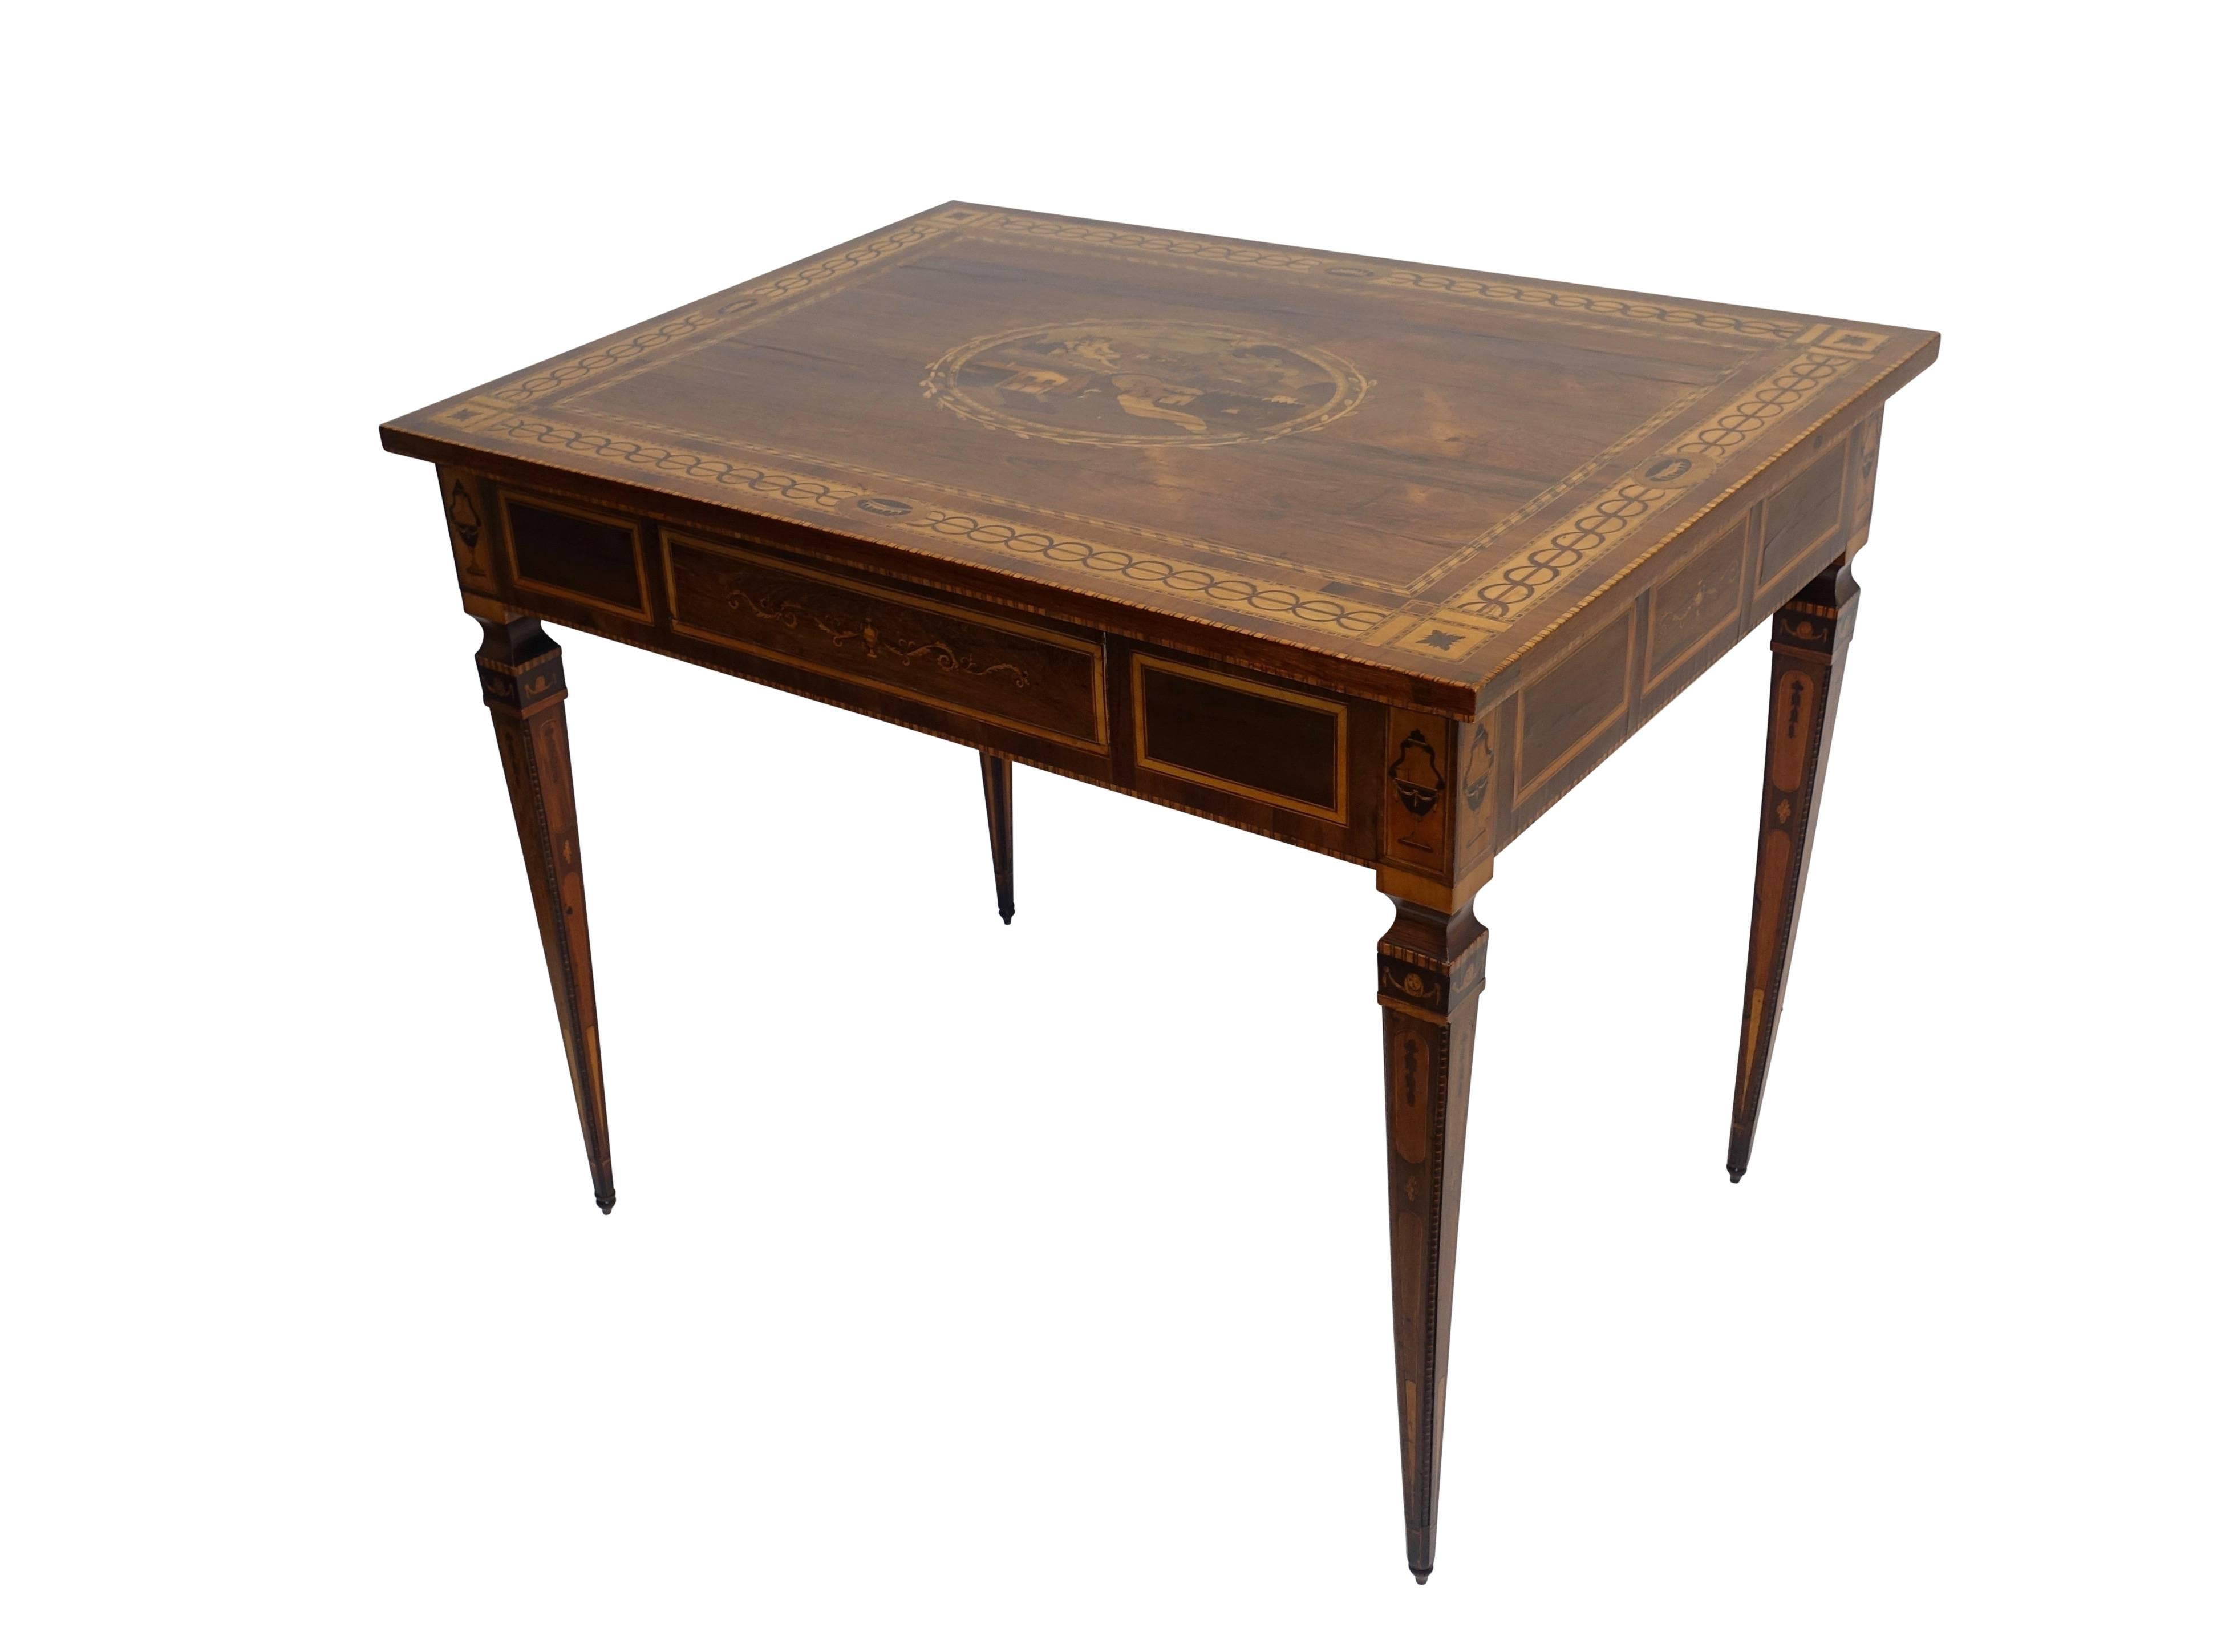 Fine Magilini style walnut and intricately inlaid fruitwood, walnut, black walnut, satinwood and rosewood center or writing table with one drawer on elegant tapering legs. Beautiful marquetry and parquetry work on all surfaces areas including the